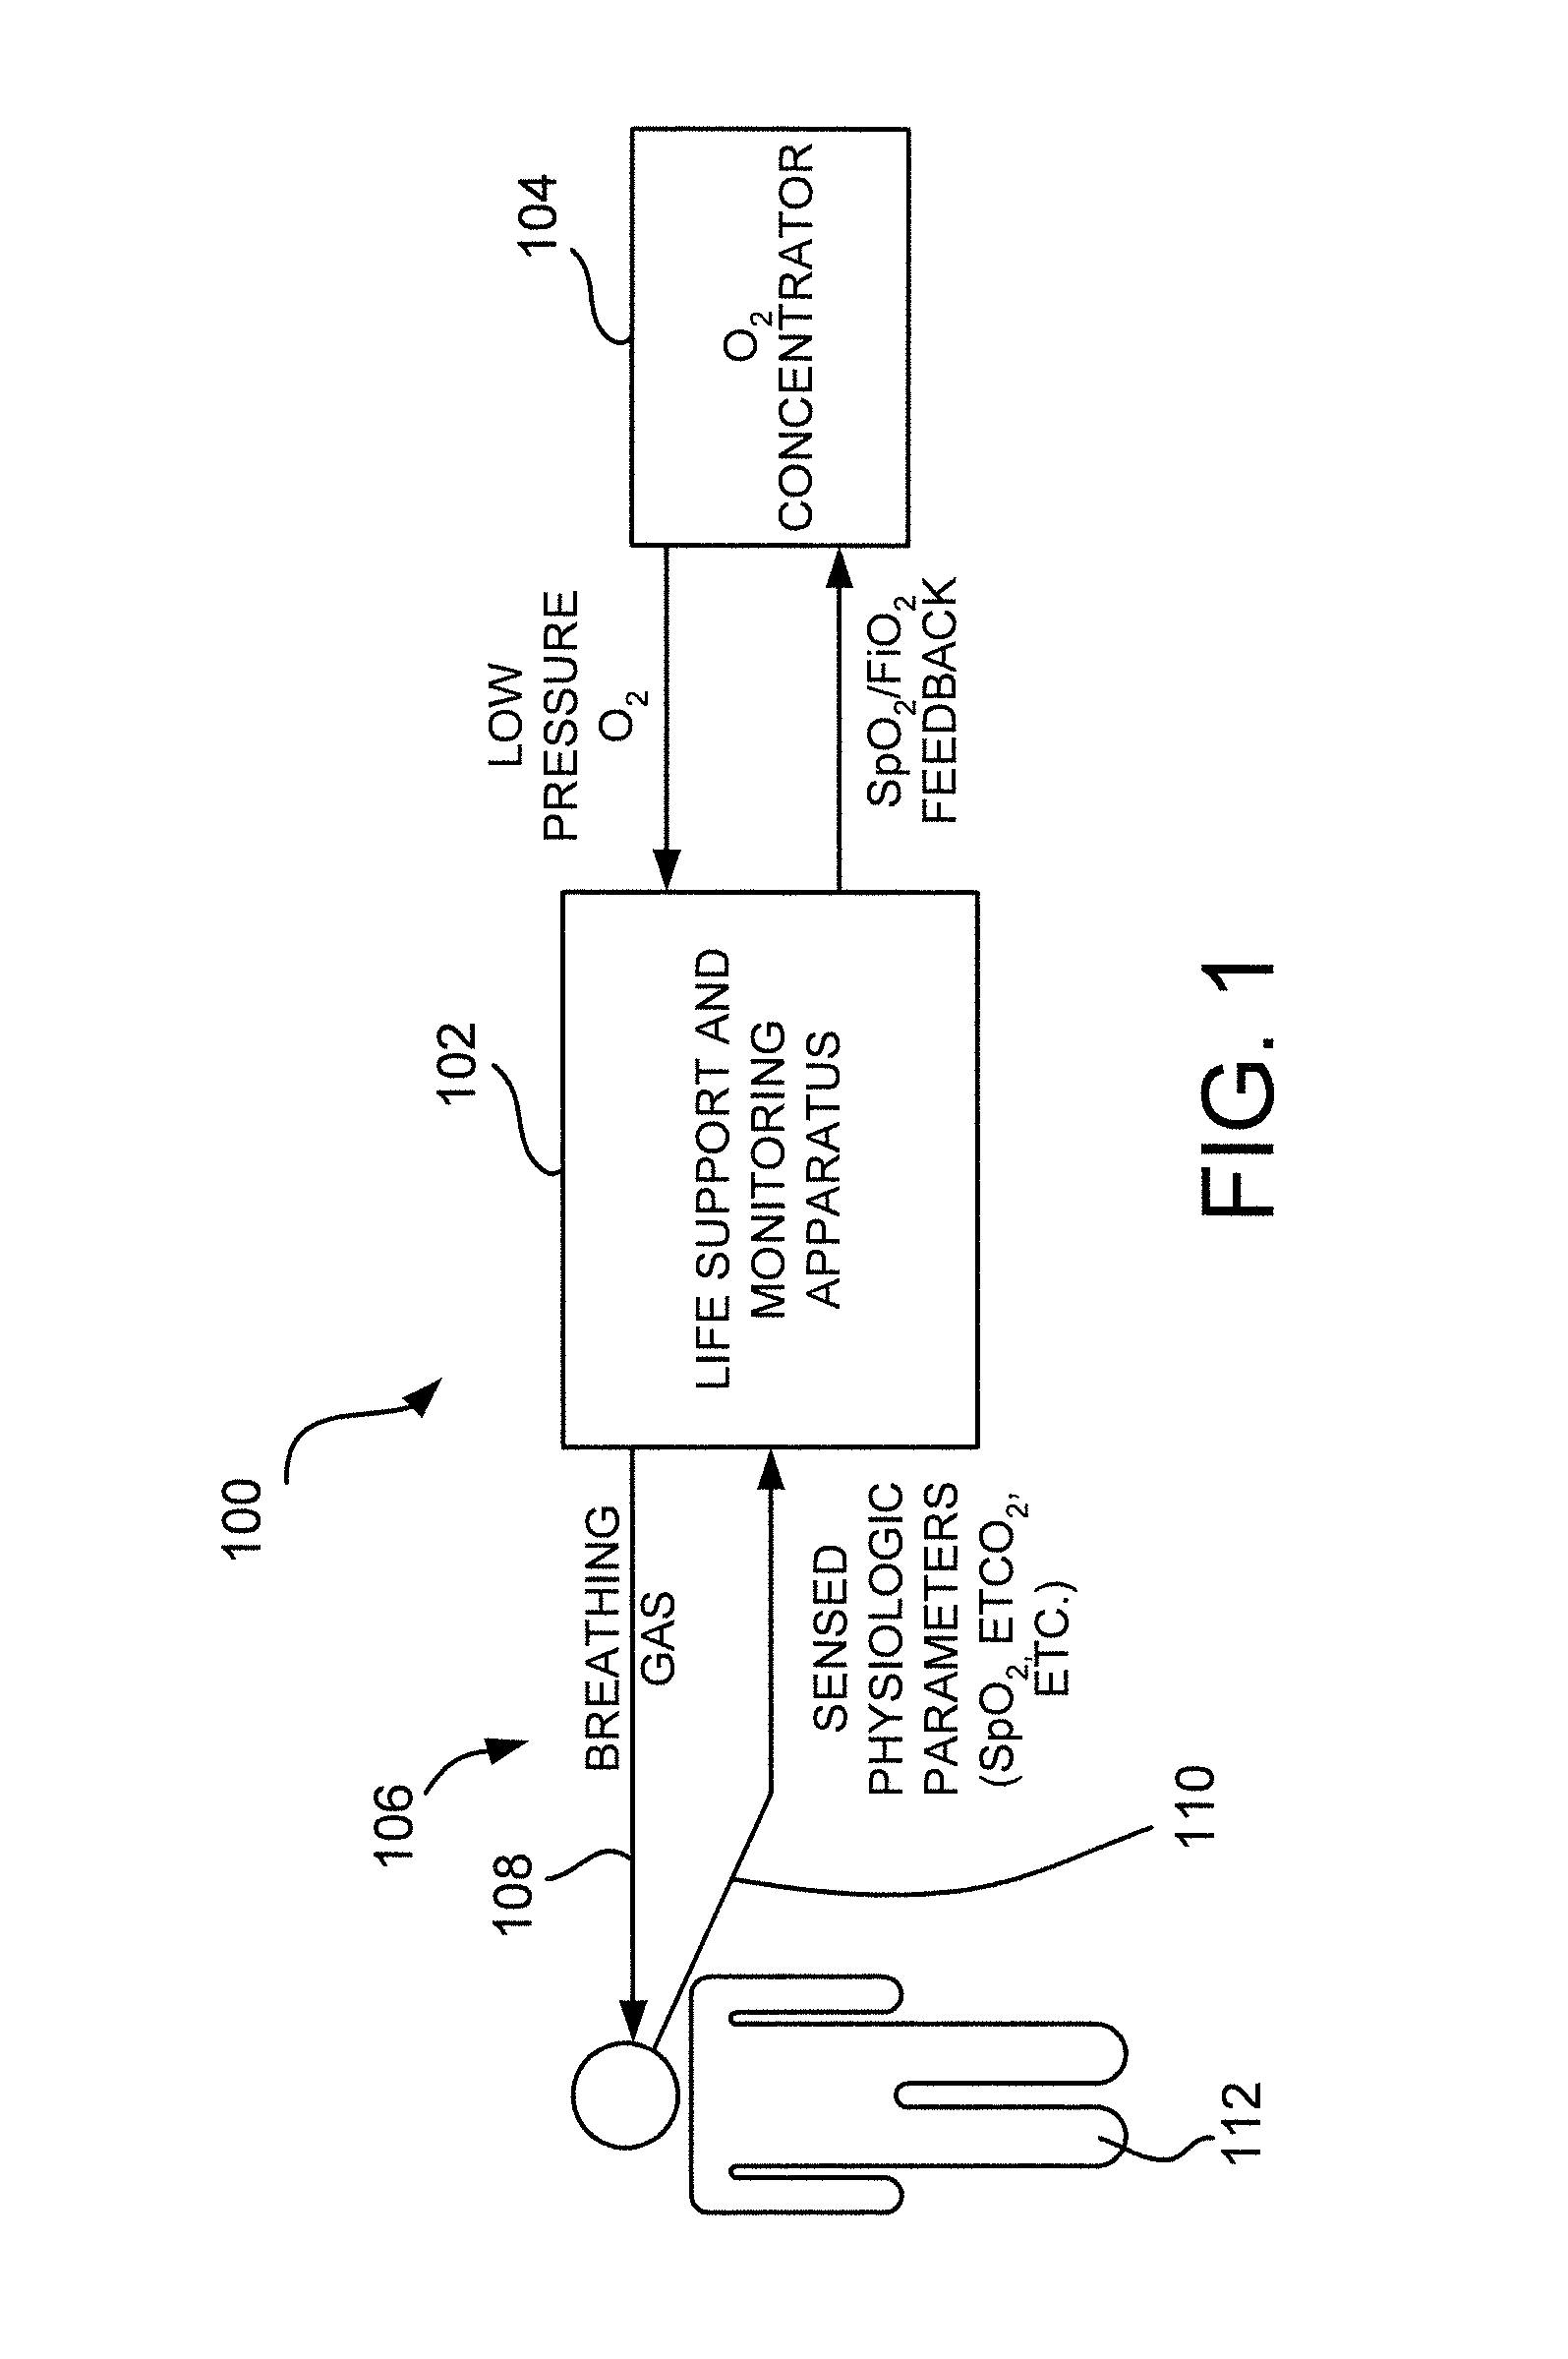 Life support and monitoring apparatus with malfunction correction guidance